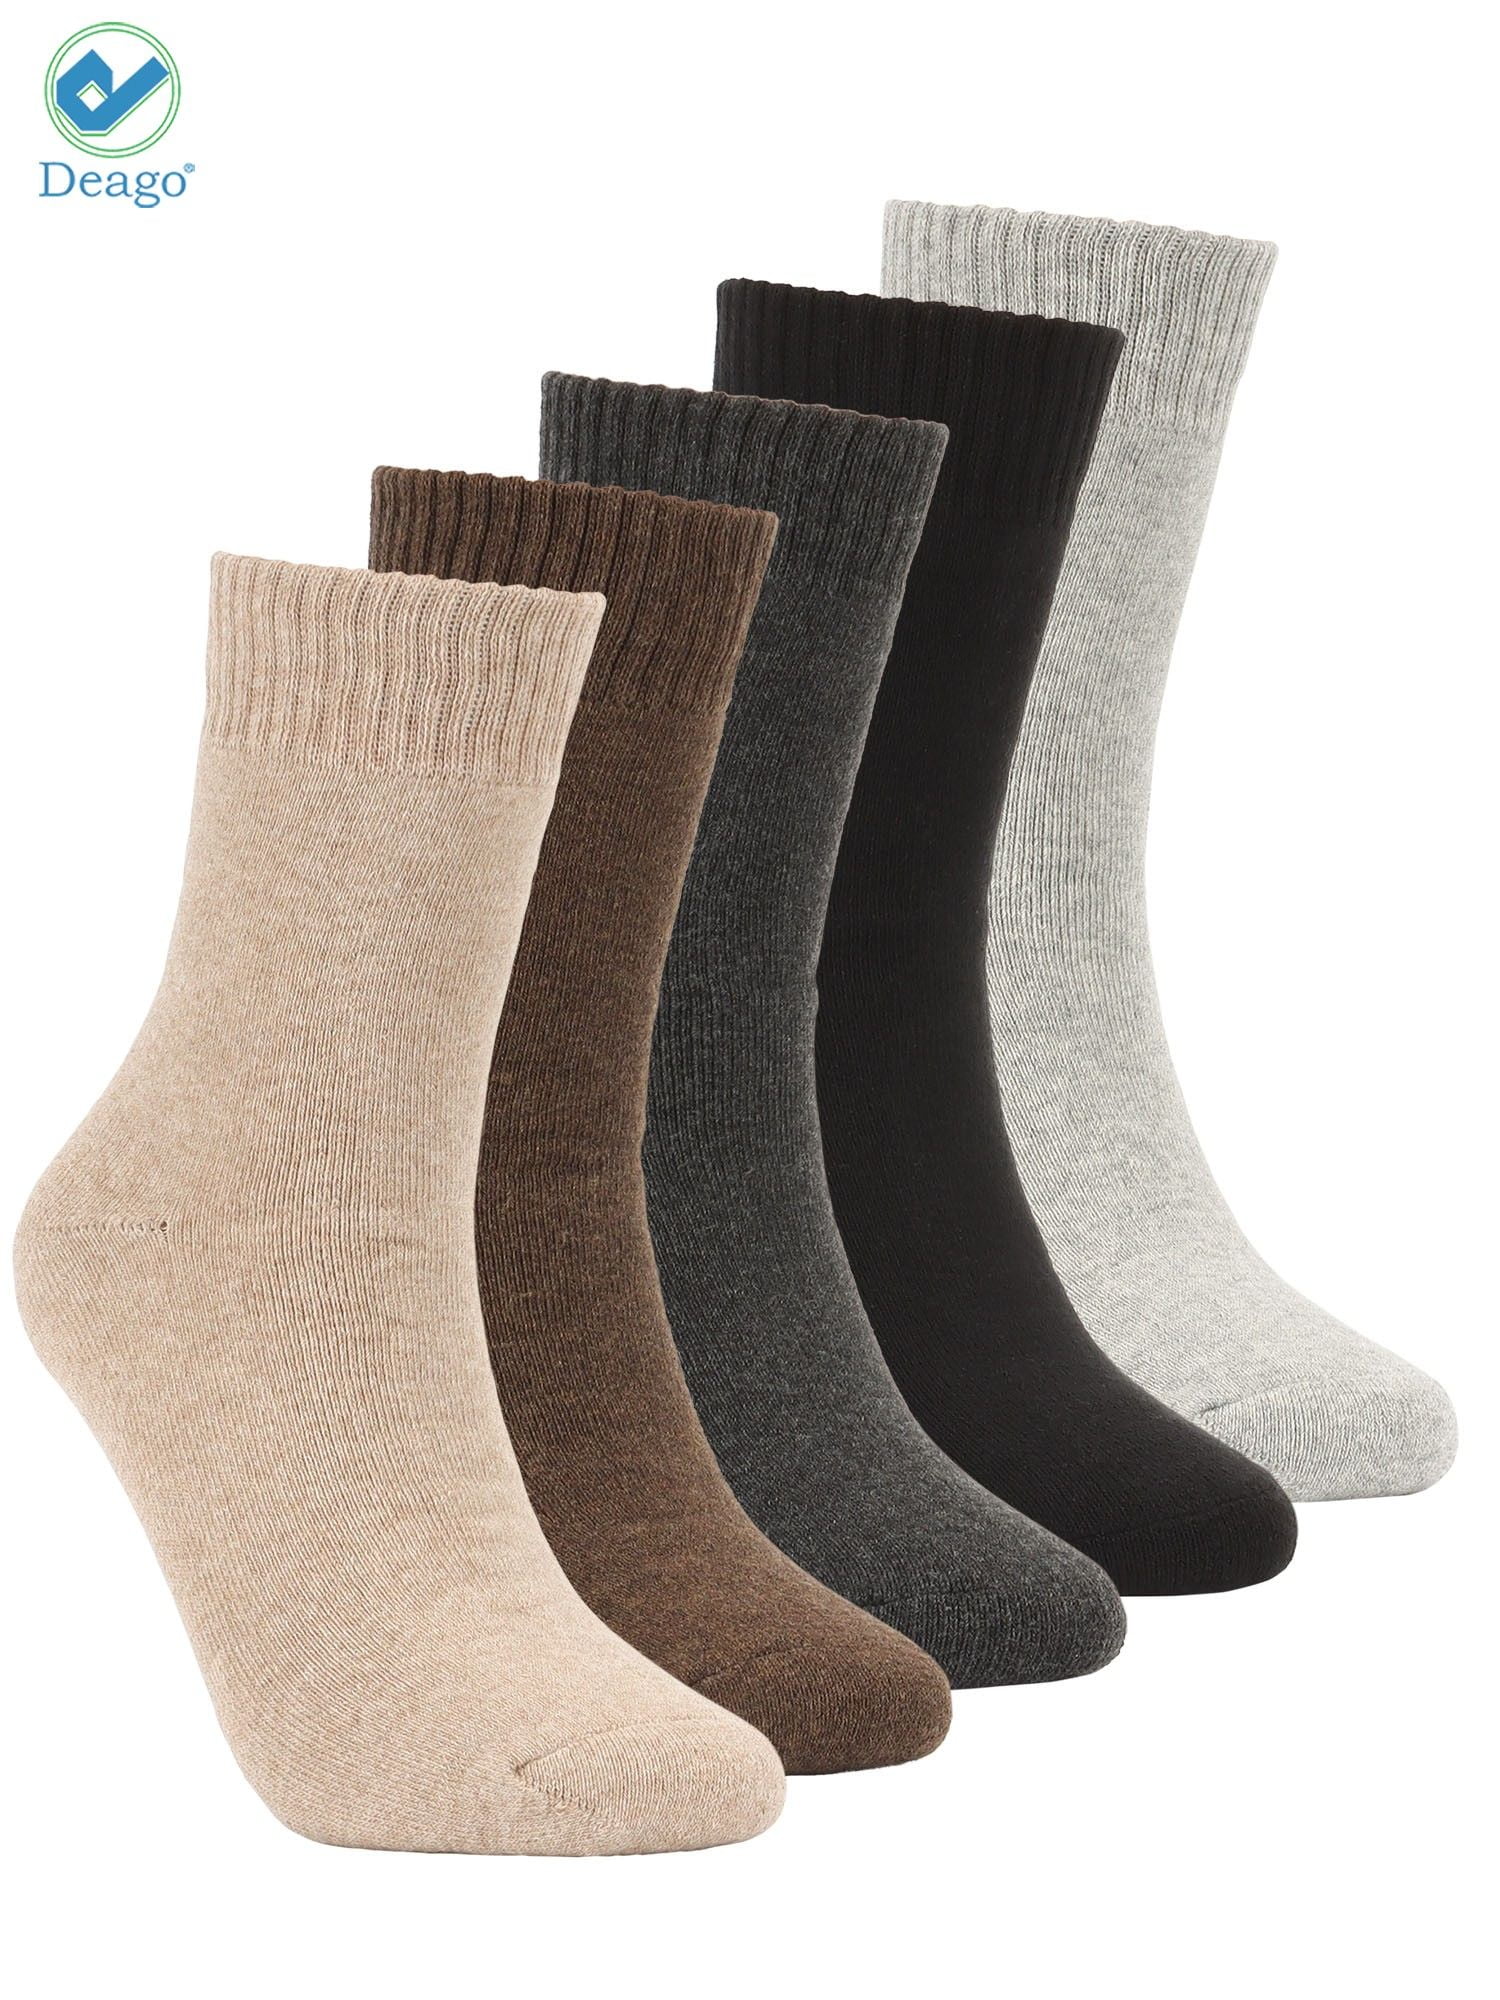 5 Pairs Mens Long Knee High Thick heavy Duty Cotton Work Boot Socks Size 8-12 